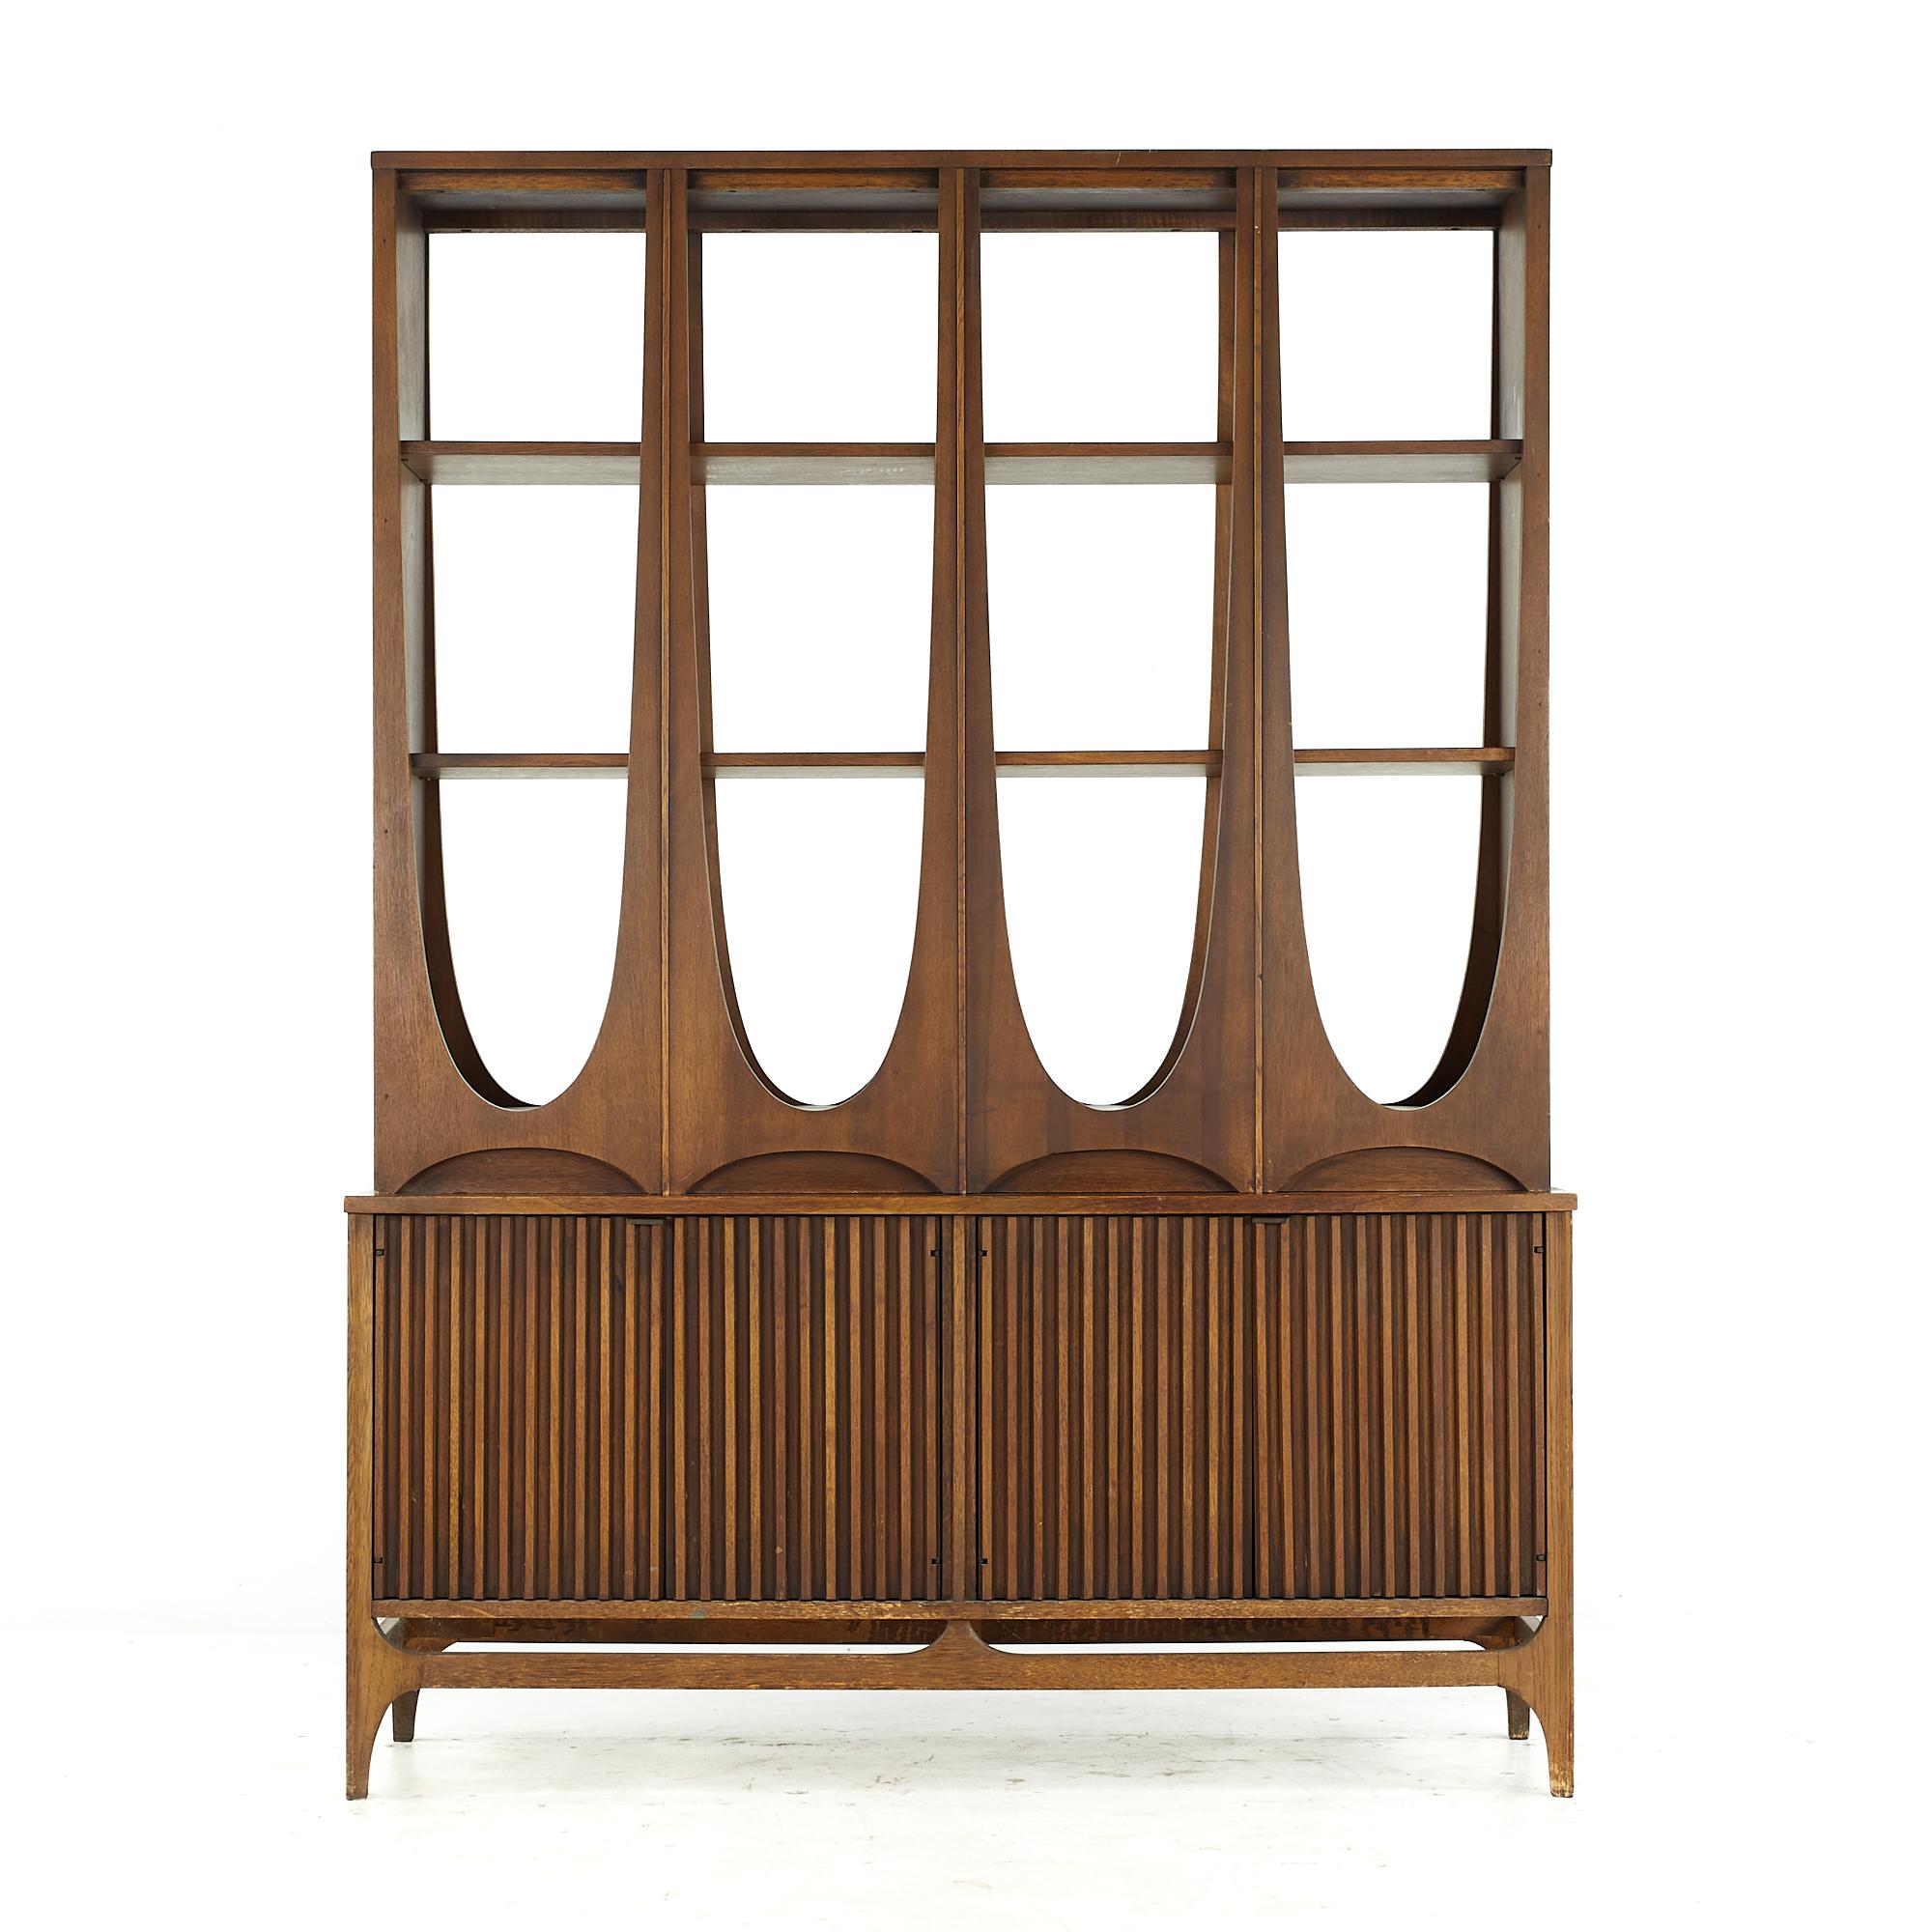 Broyhill Brasilia midcentury Walnut Room Divider

The cabinet measures: 54 wide x 17 deep x 26.5 inches high
The hutch measures: 52 wide x 13.5 deep x 46 inches high
The combined height of the buffet and hutch is 72.5 inches

All pieces of